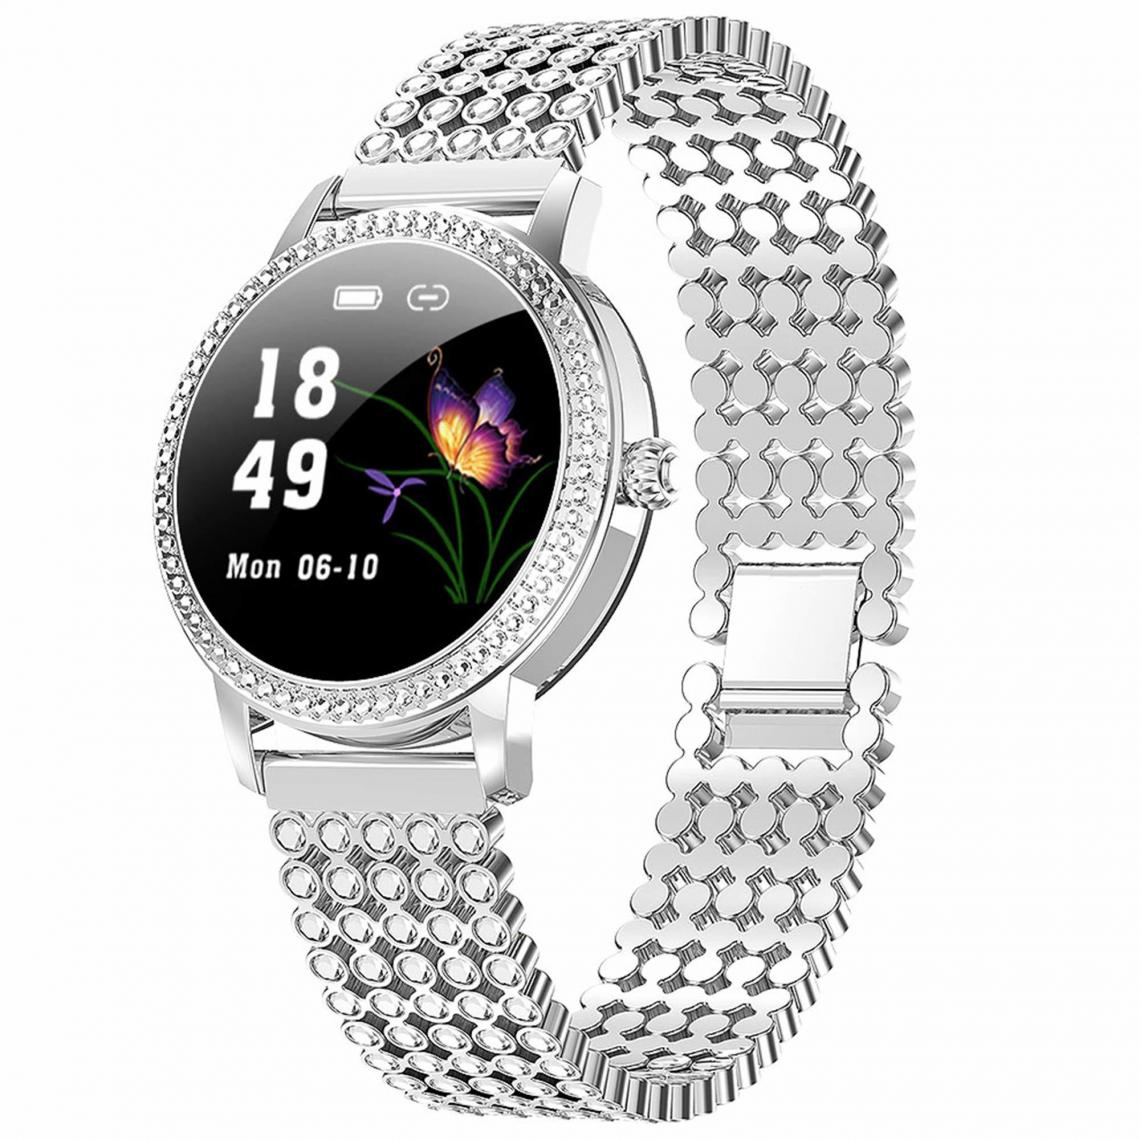 Chronotech Montres - Ladies Smart Watch Fitness Activity Tracker Bracelet Diamond Stainless Steel Waterproof Heart Rate Blood Pressure Monitor Step Calories Counter Bluetooth Smartwatch Fashion Wrist Watch Android iOS(silver) - Montre connectée